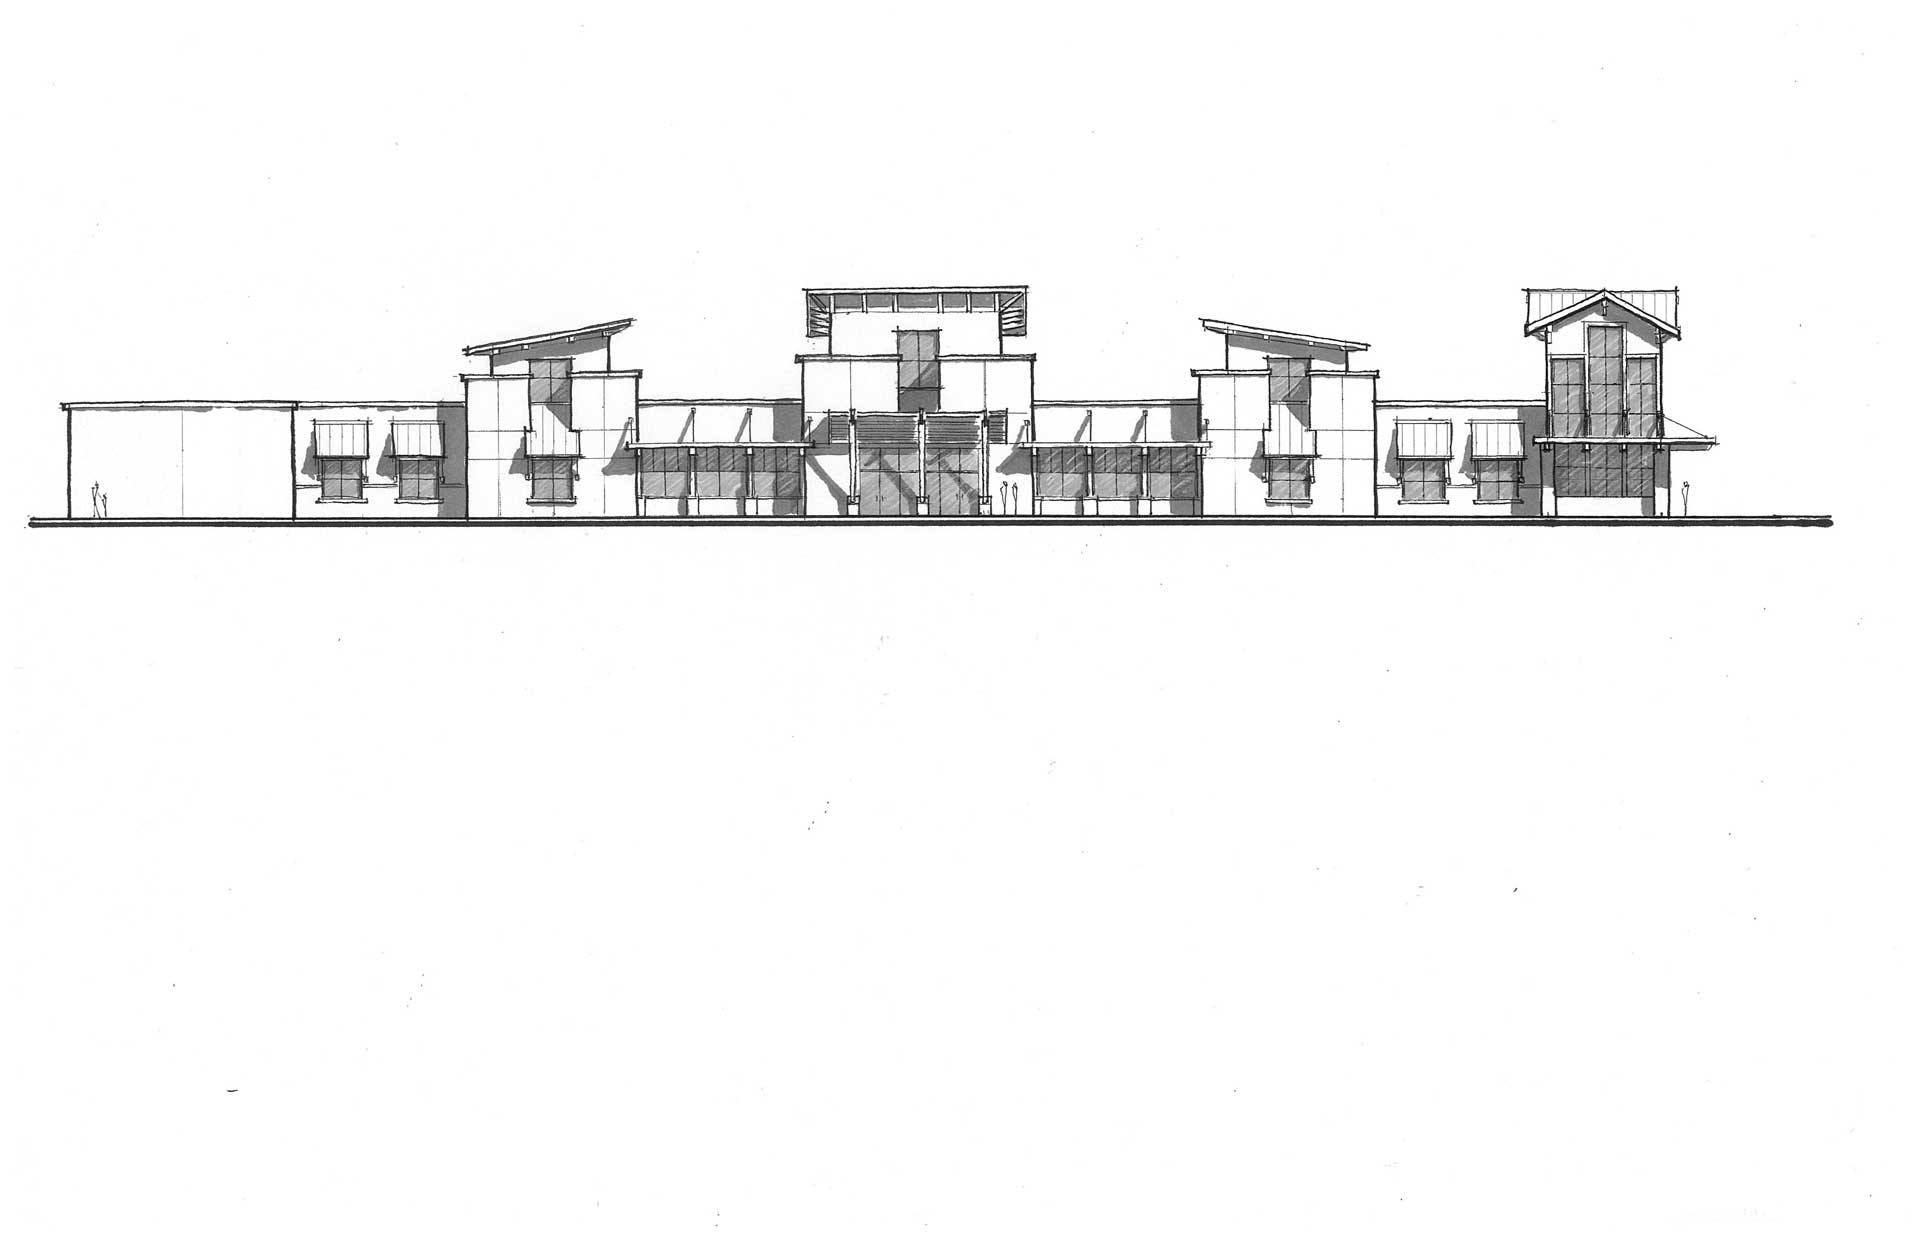 Technical drawing of commercial project, front view of buildings.